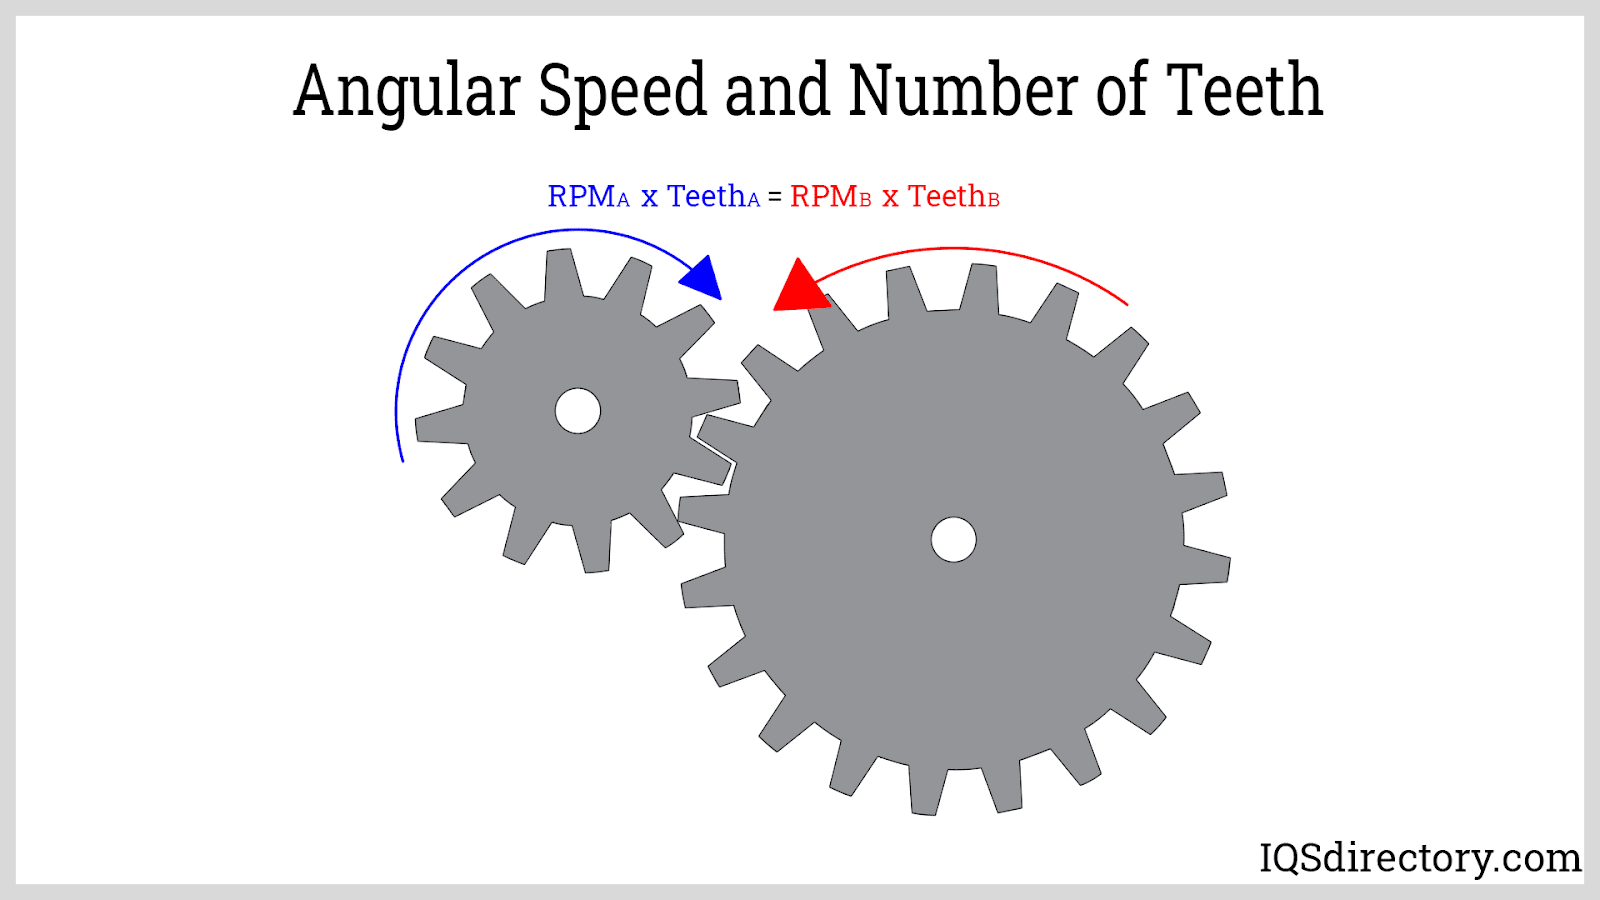 Angular Speed and Number of Teeth